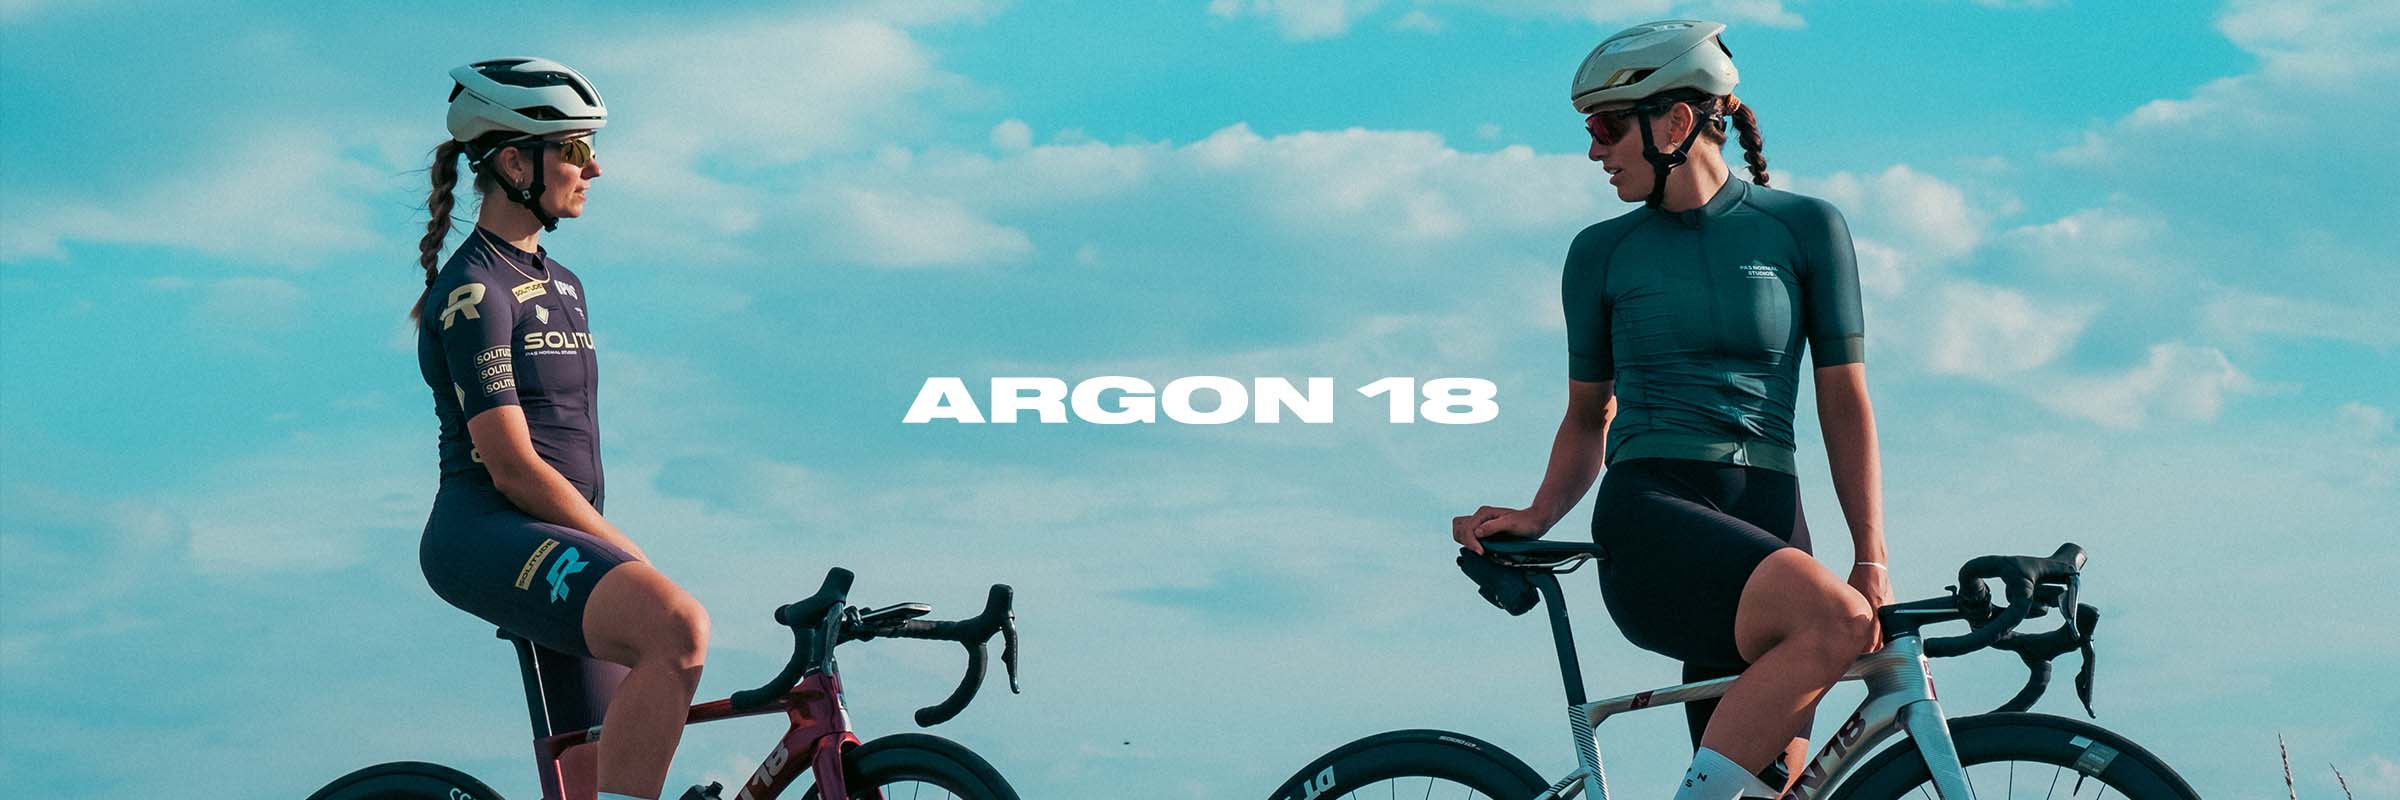 Discover Argon 18 bikes at Bicycles Quilicot